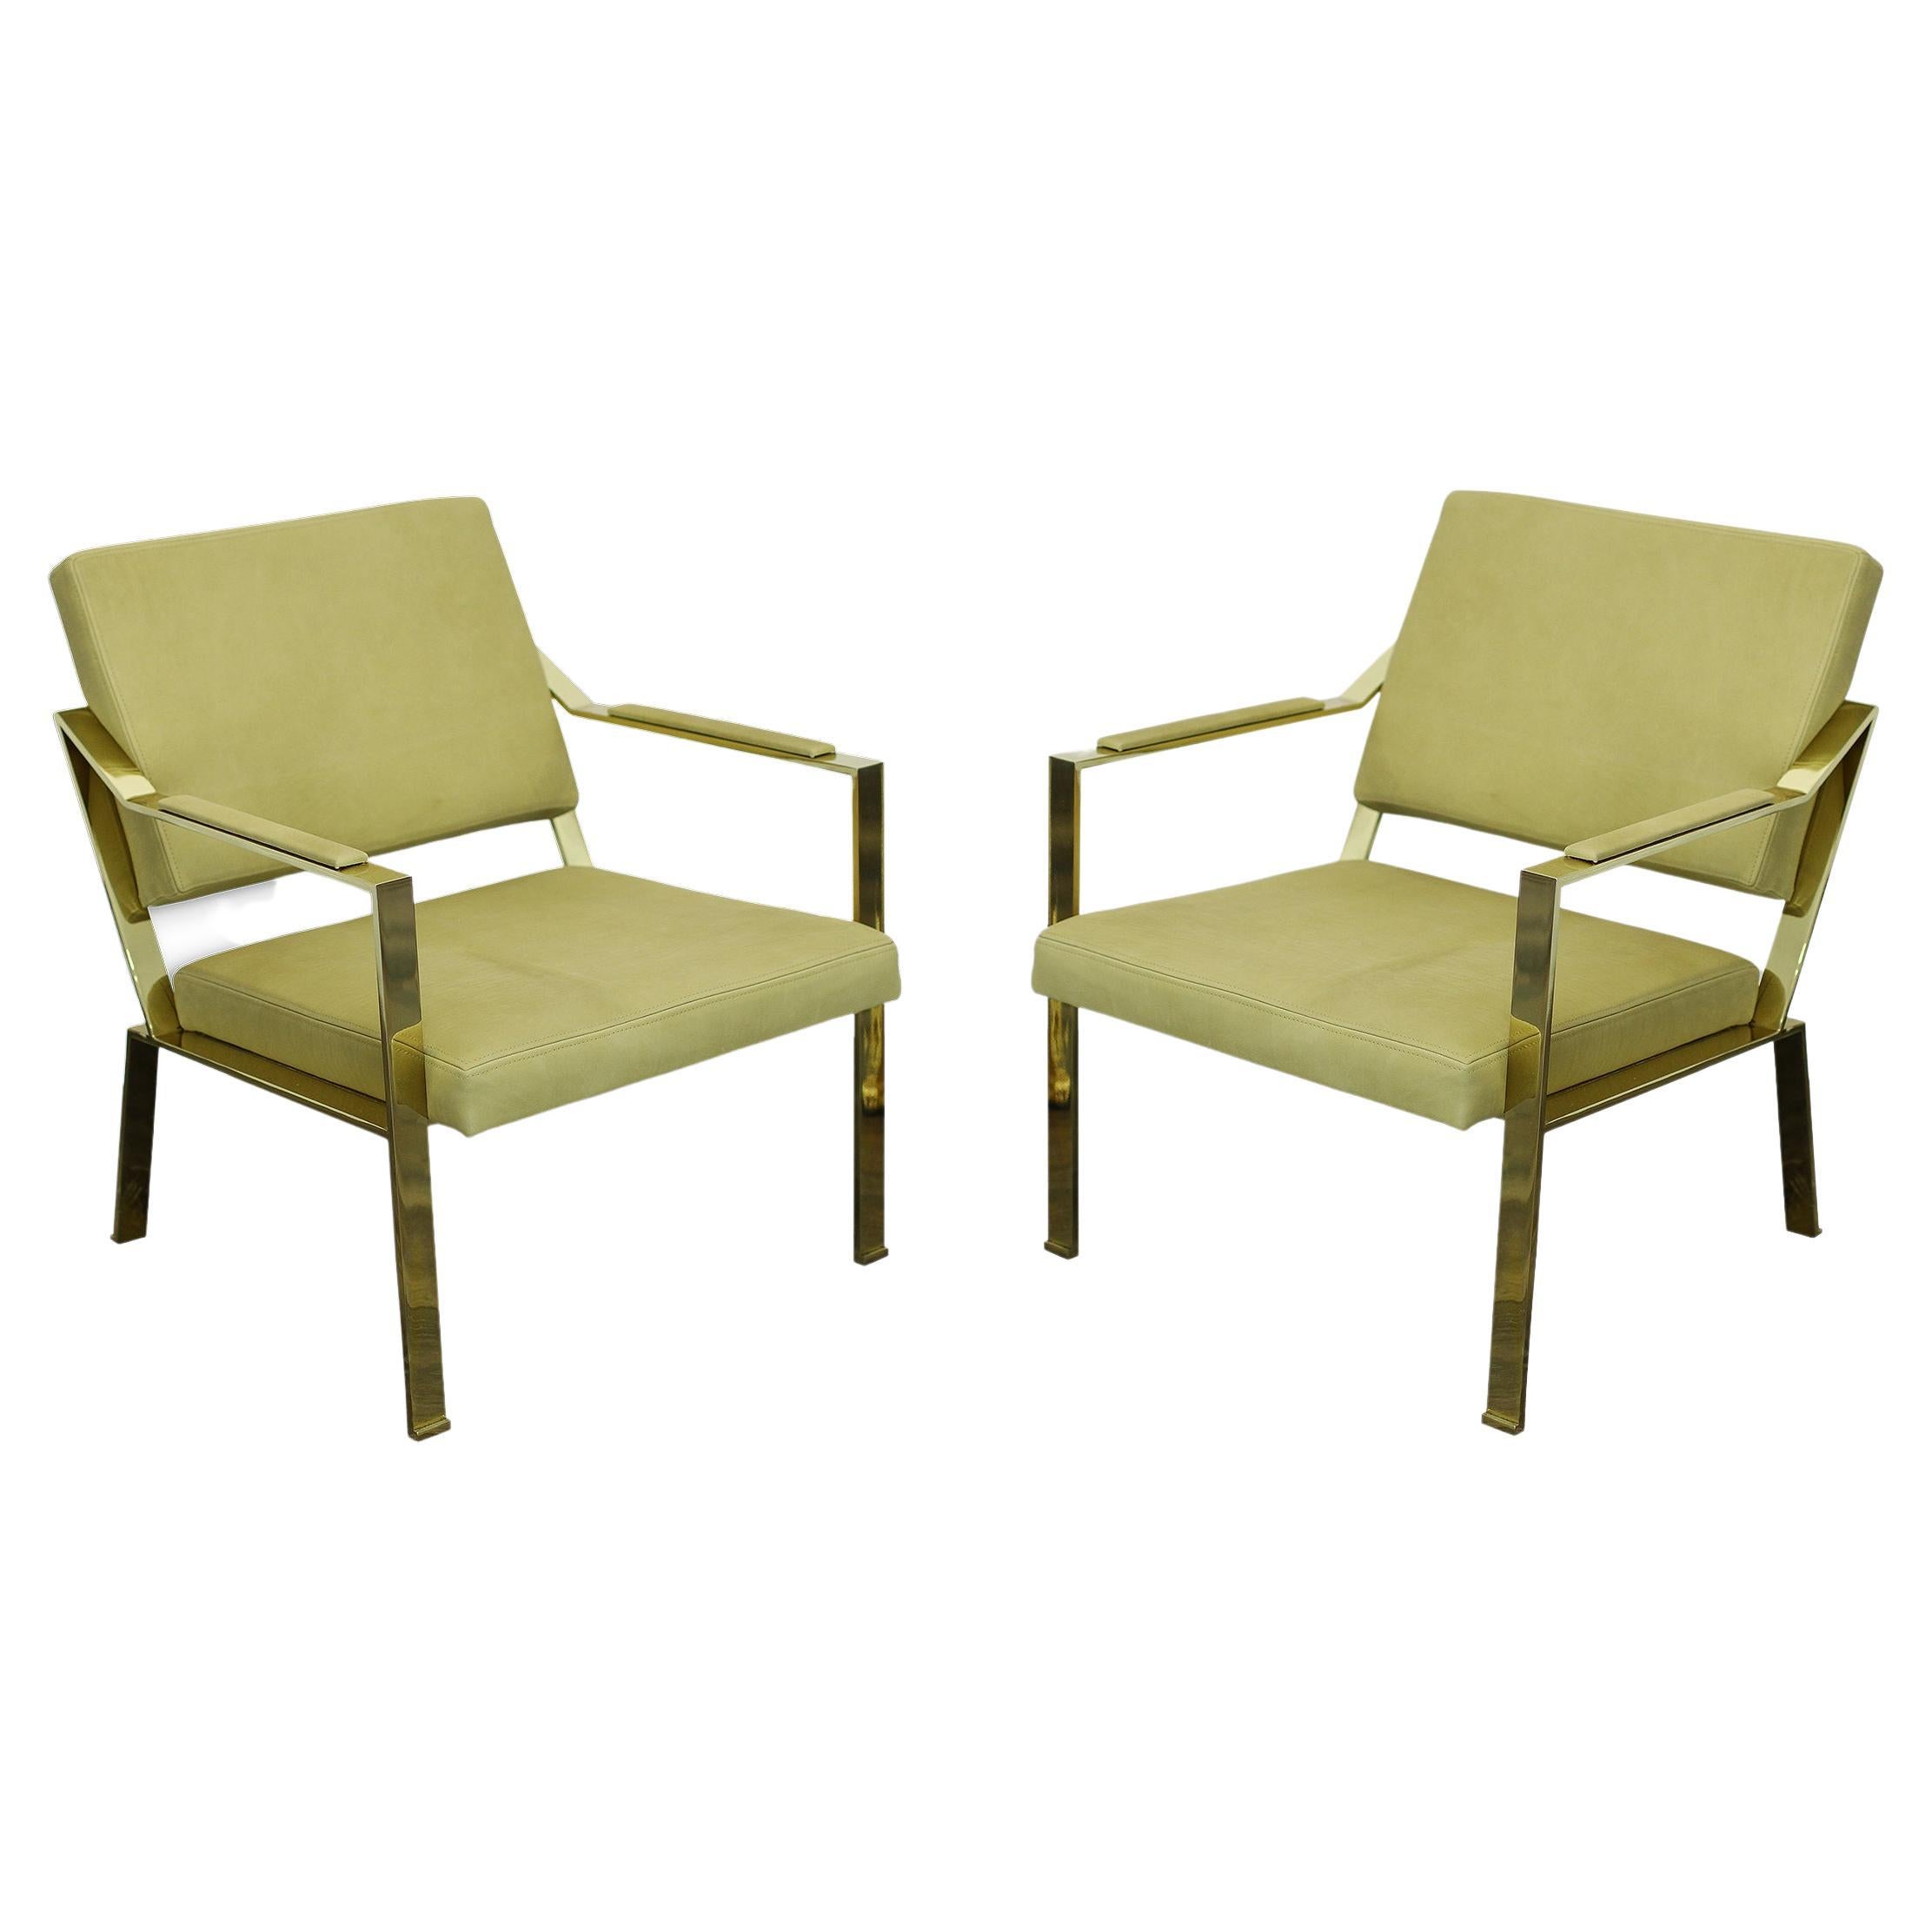 Very elegant pair of Gilt Iron chairs covered in light green leather. For Sale